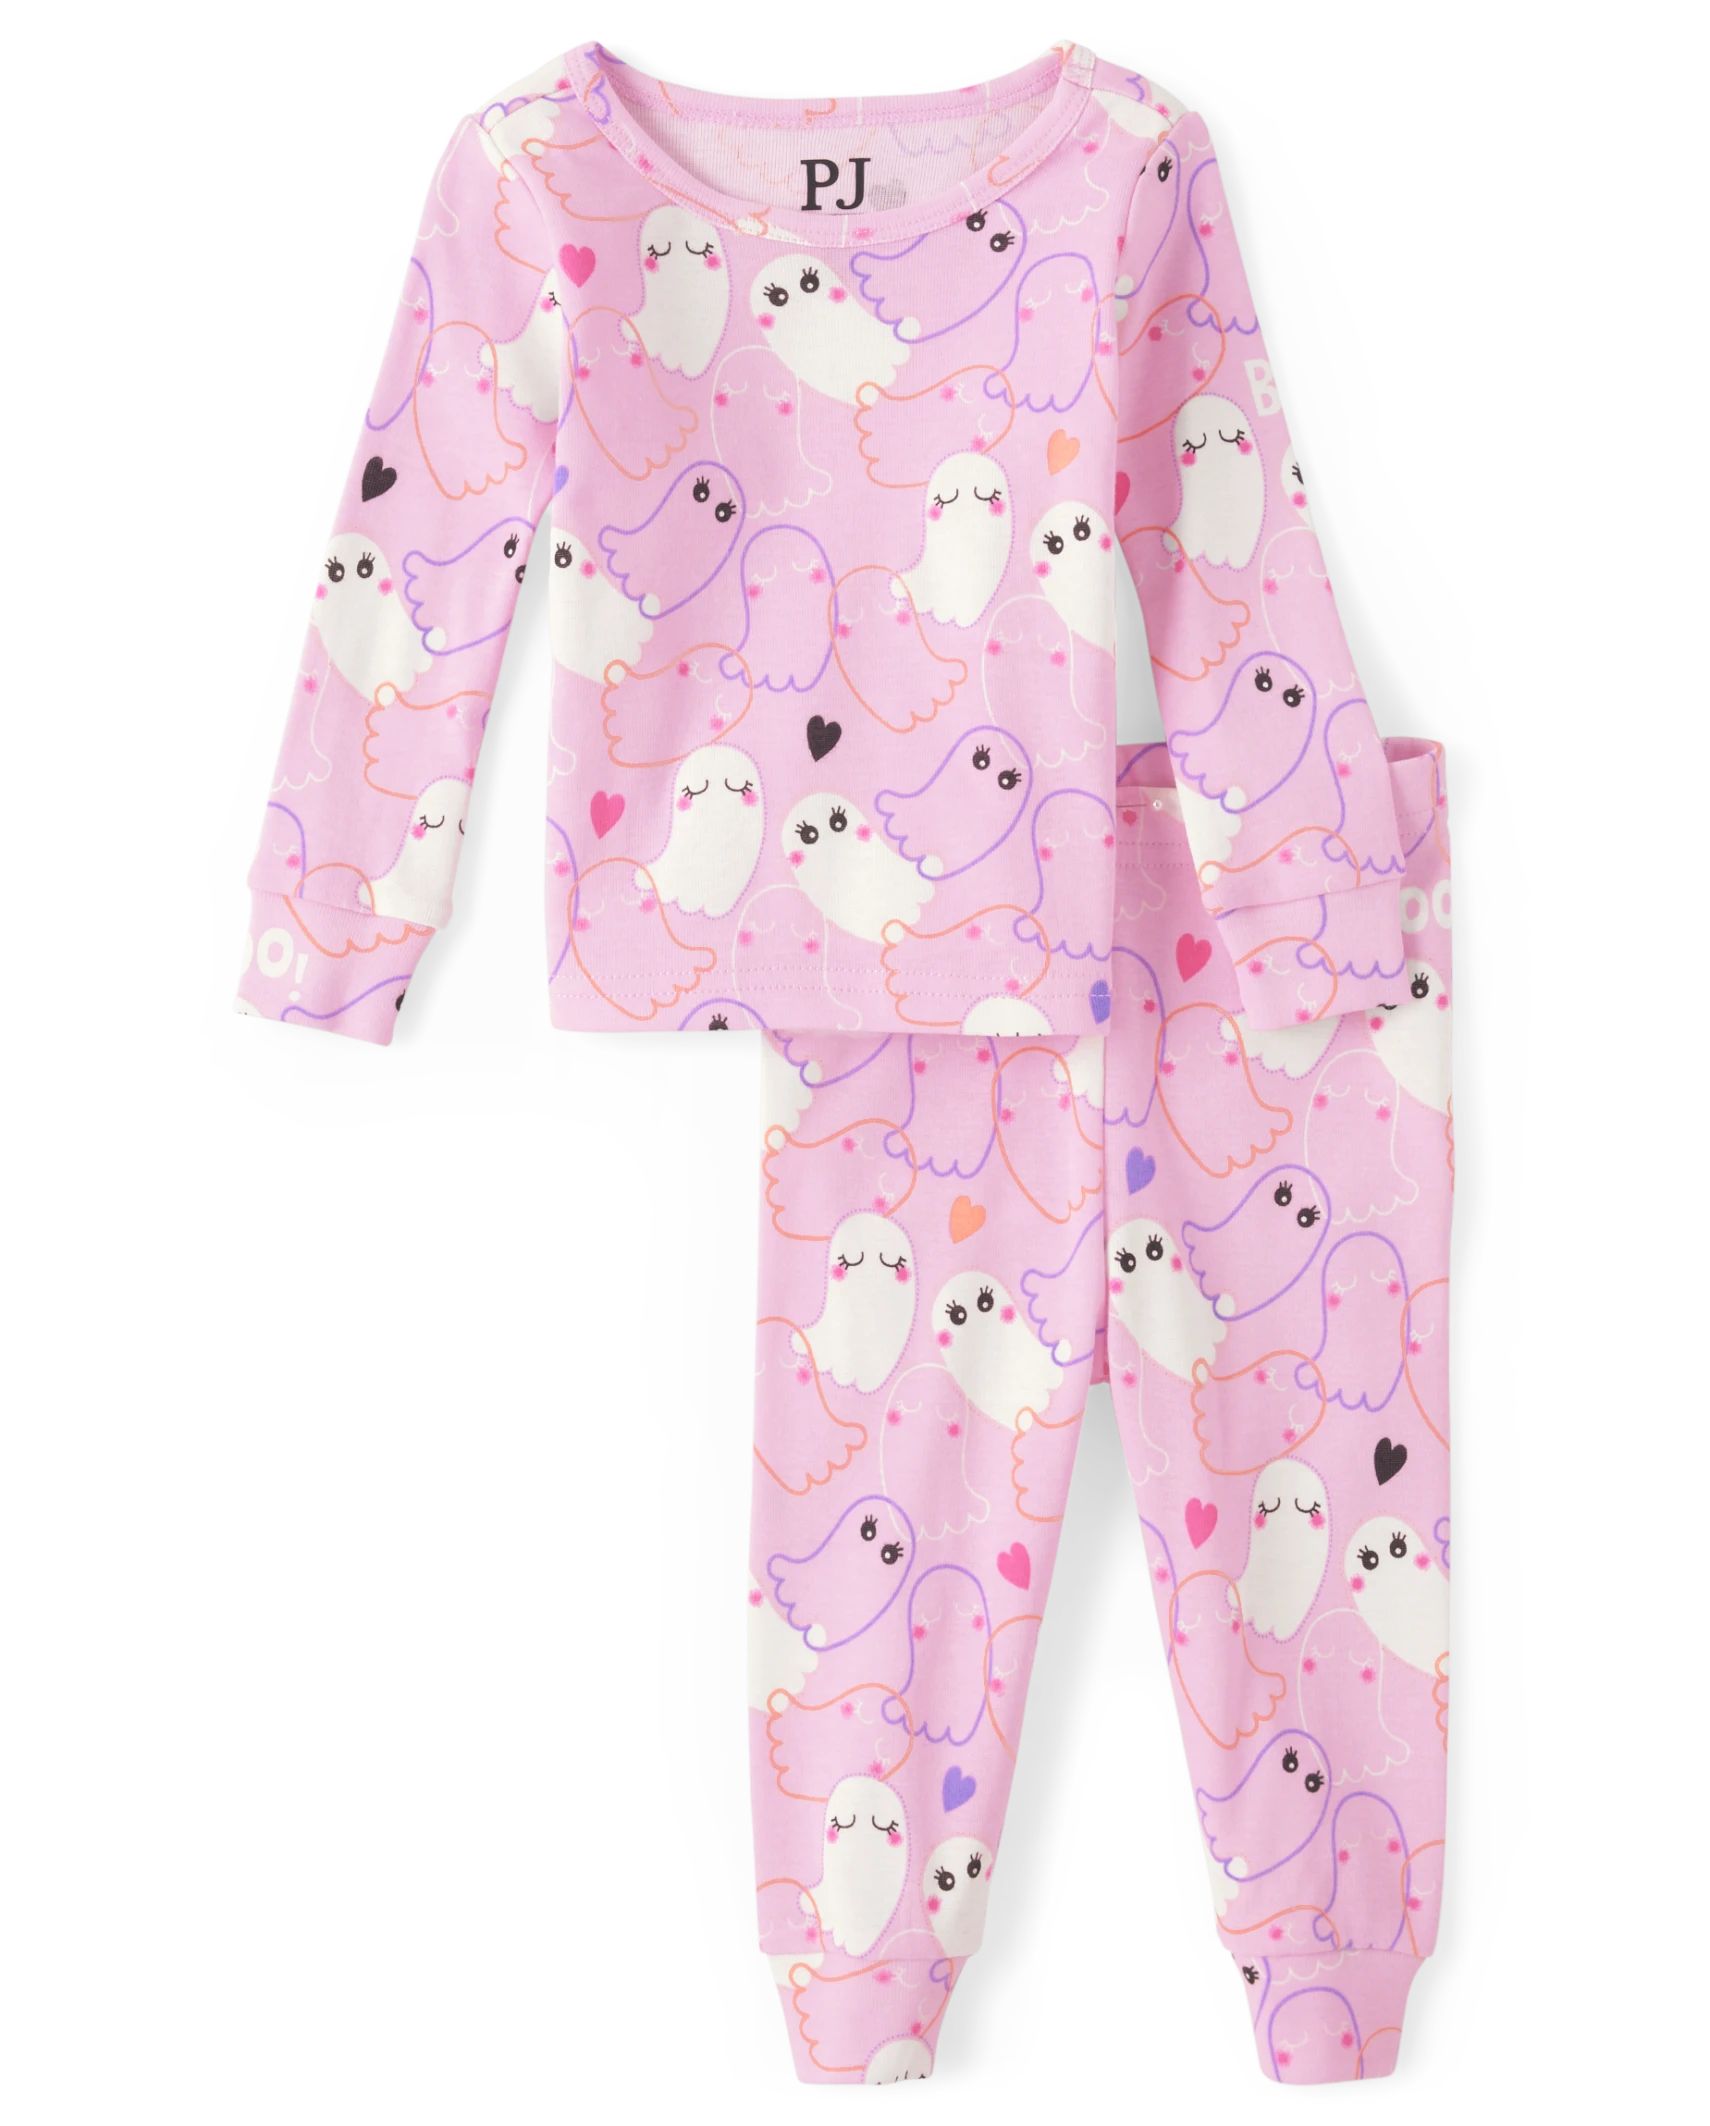 Baby And Toddler Girls Glow Ghost Snug Fit Cotton Pajamas - charisma | The Children's Place